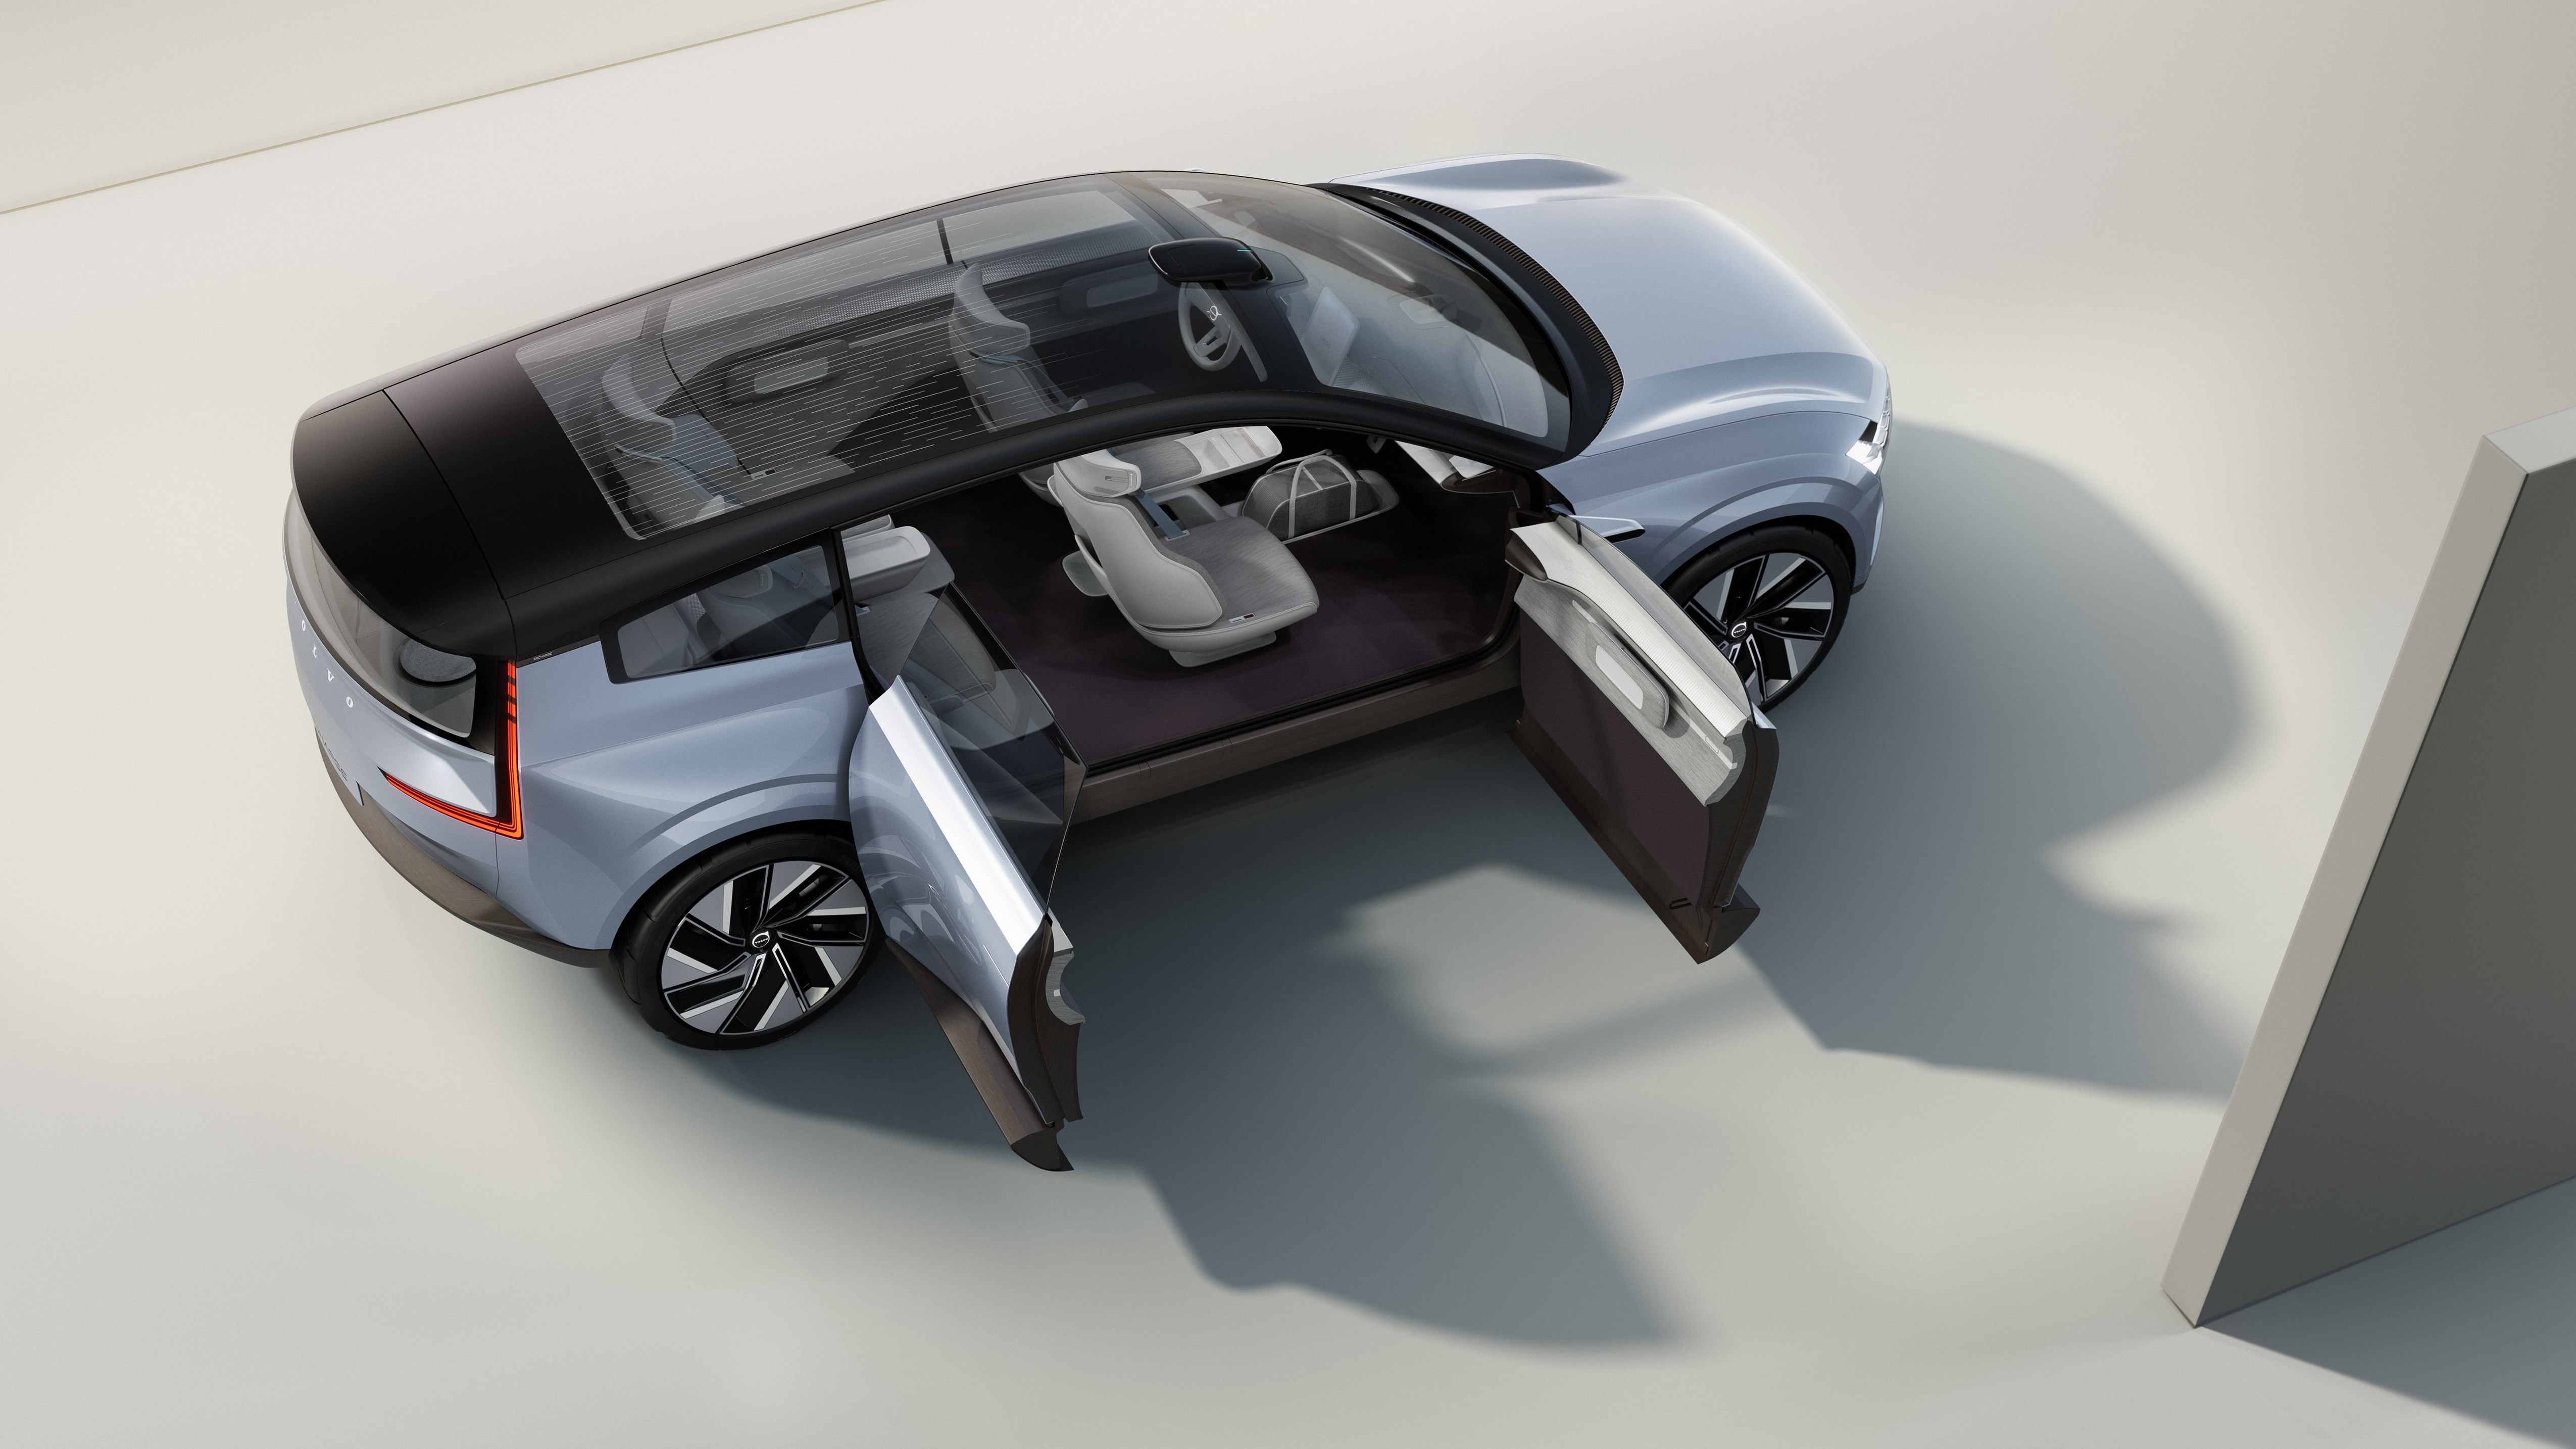 Volvo Cars sets the tone for its next-gen vehicles with 'Concept